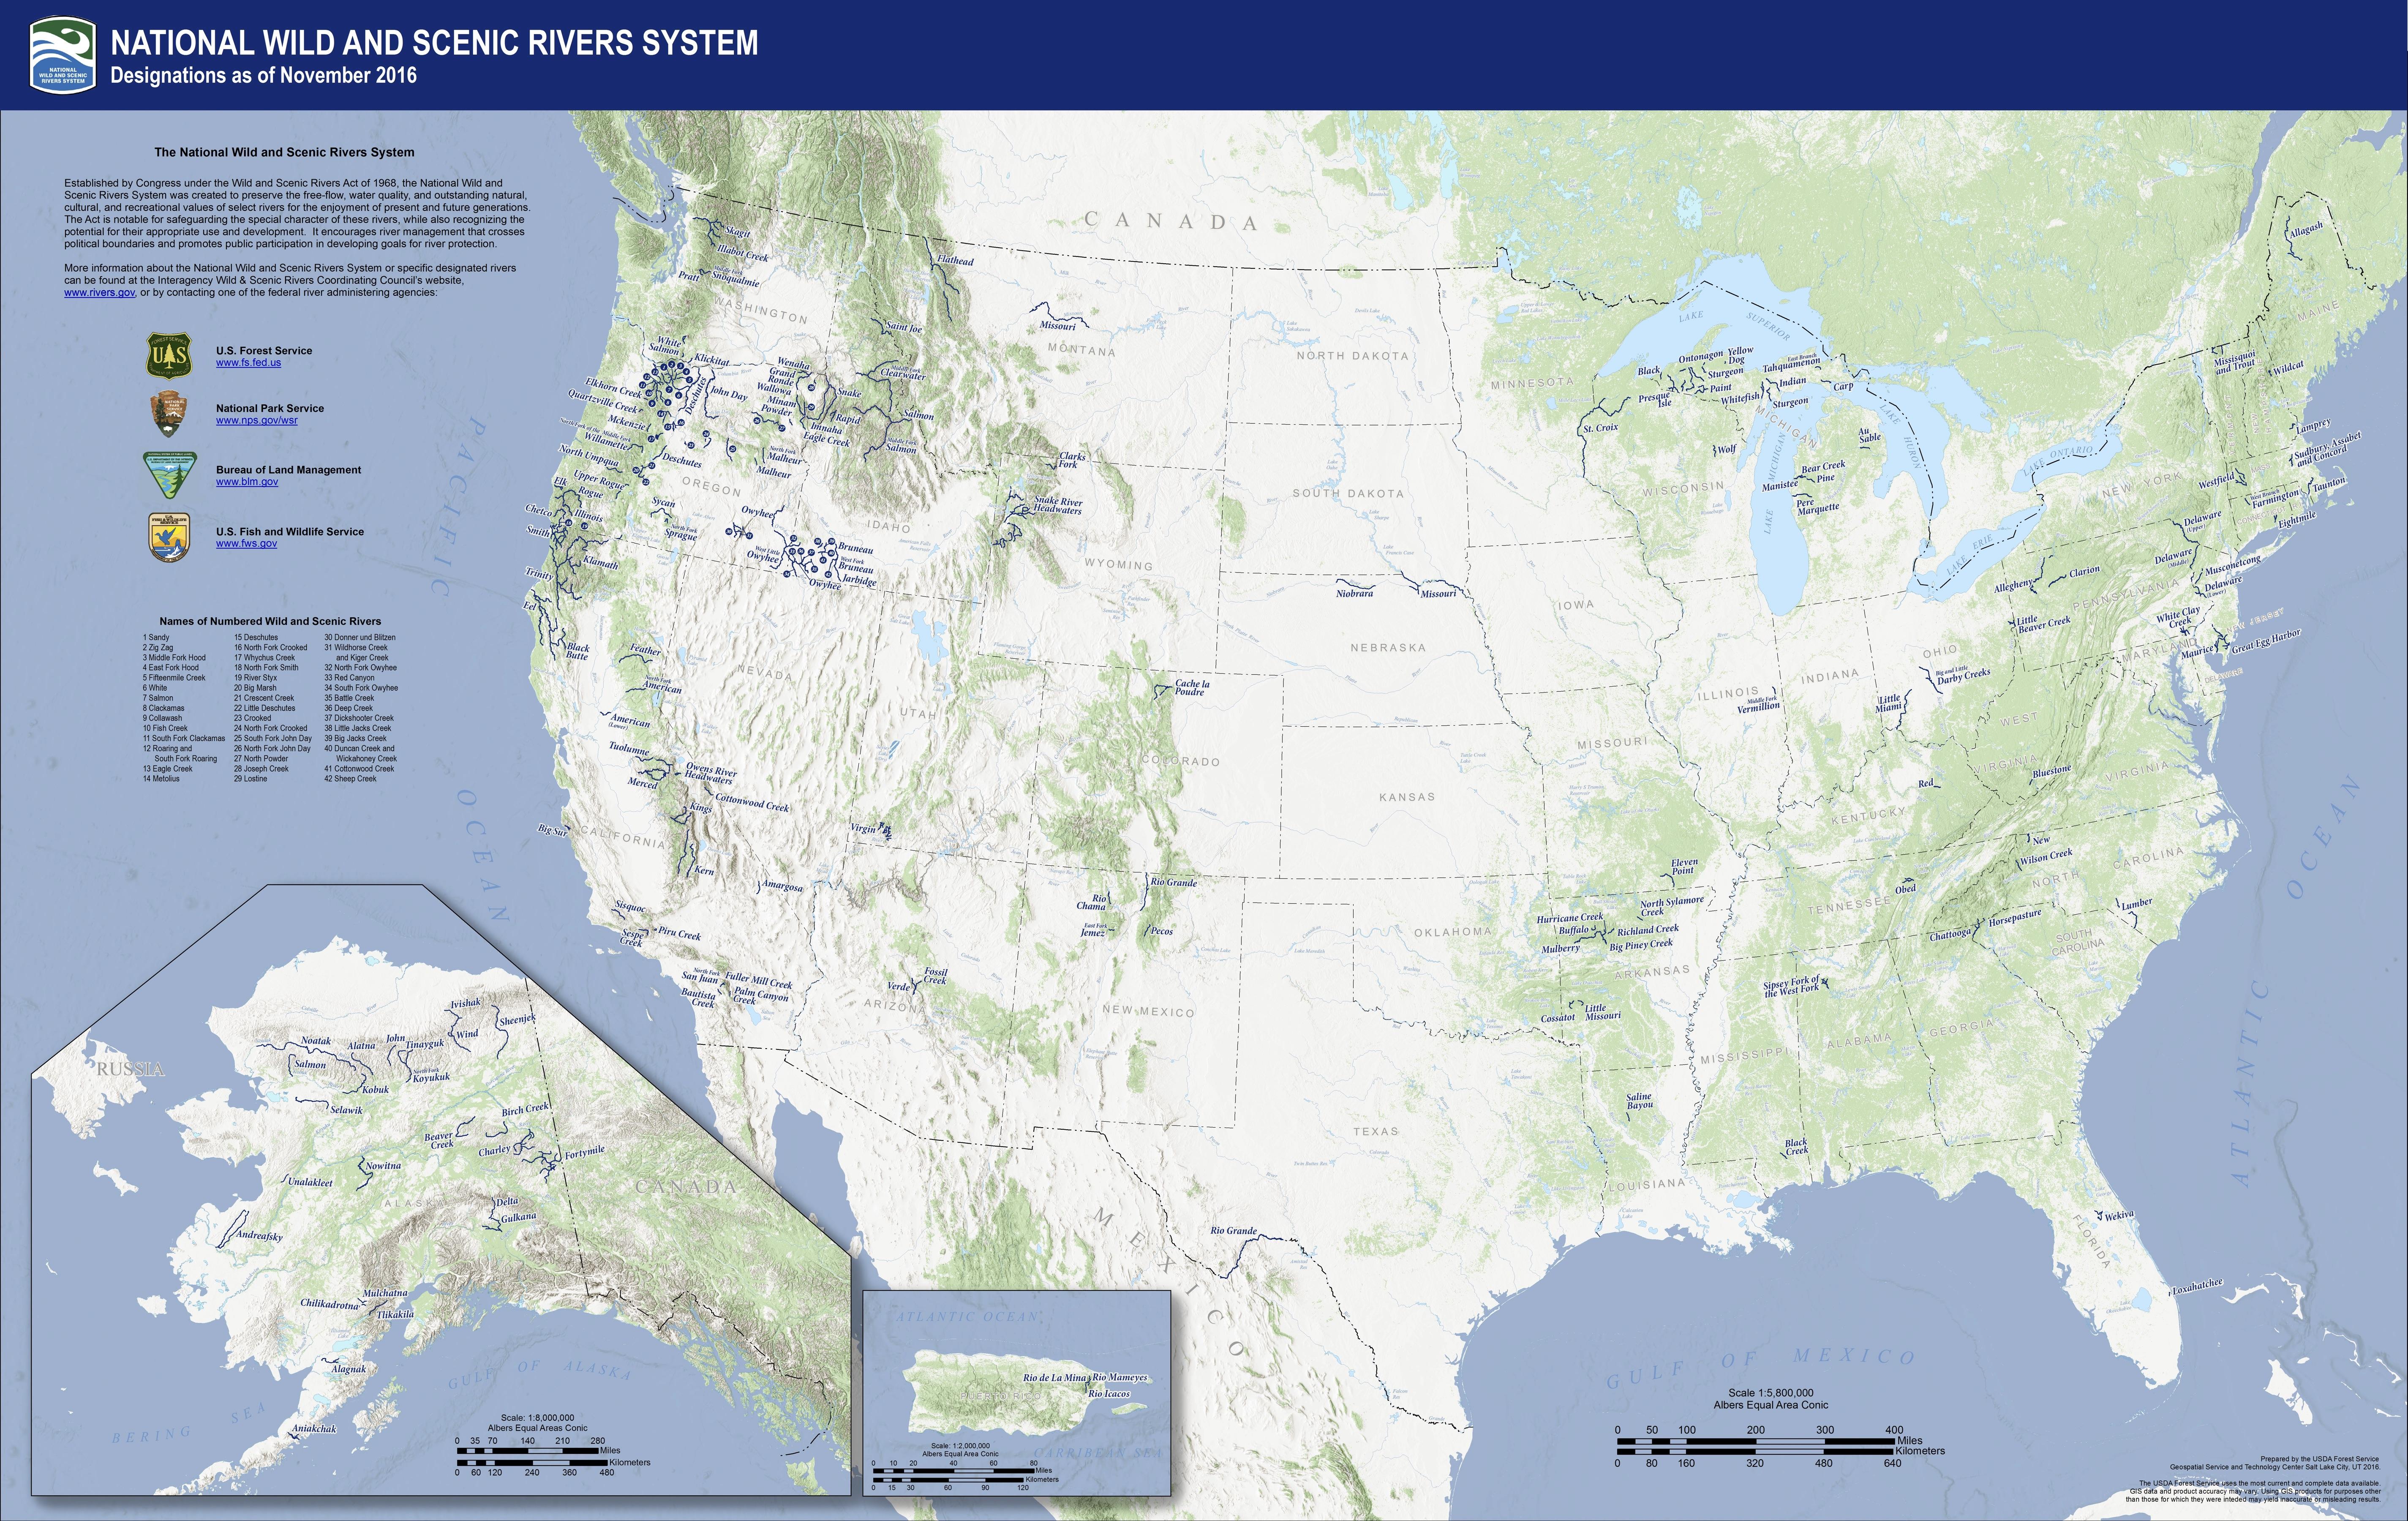 Map of the national wild and scenic rivers system